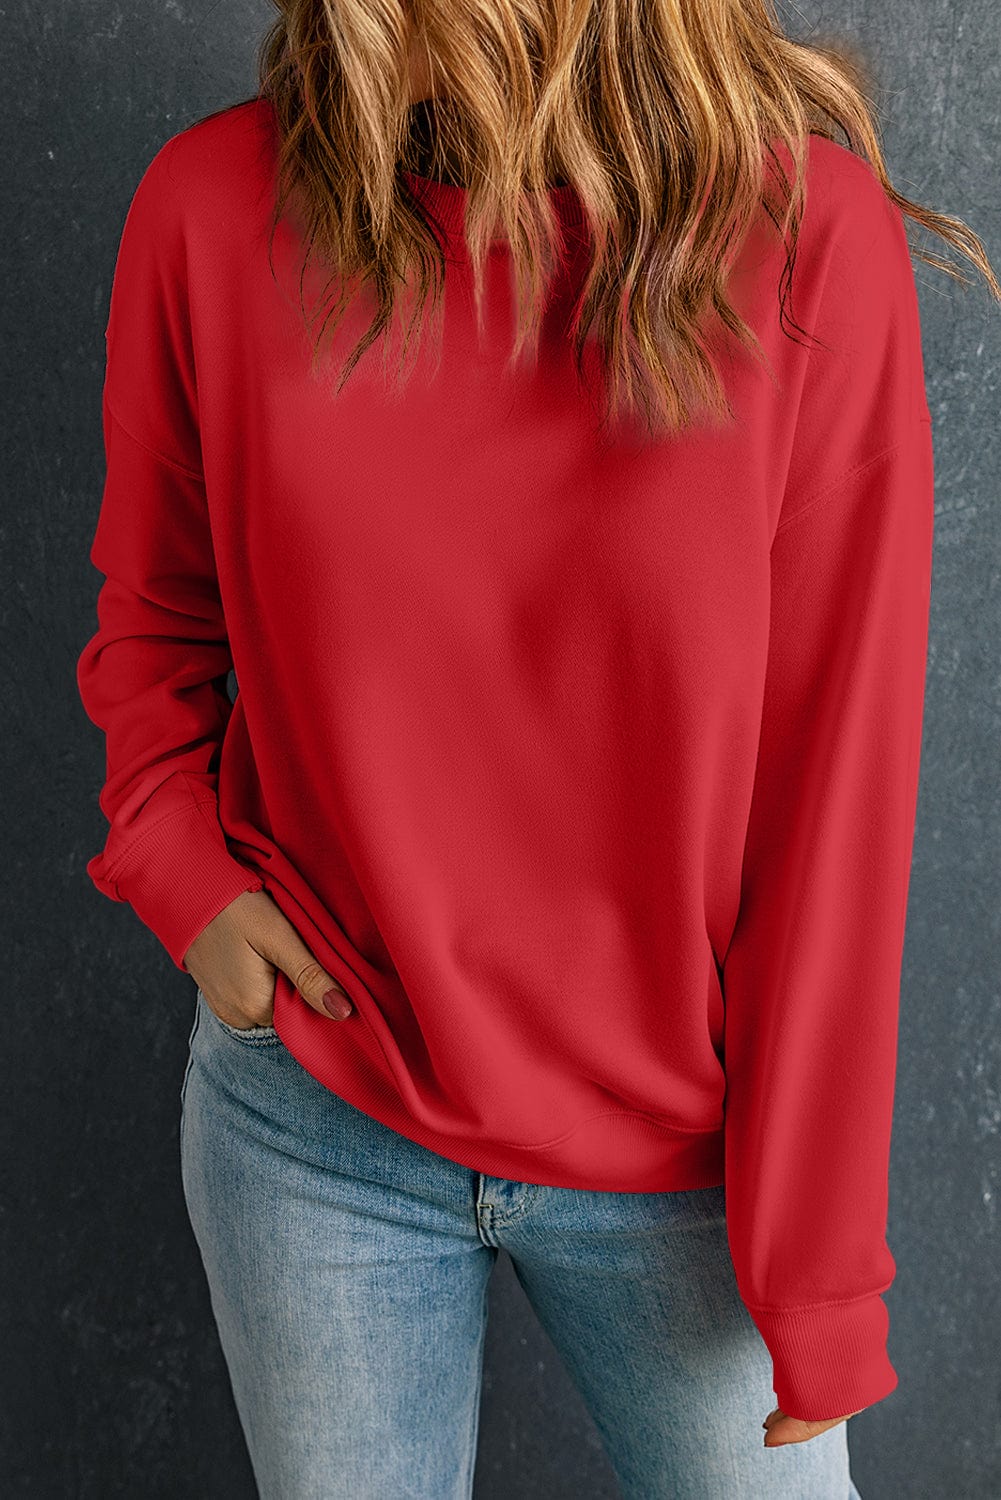 The802Gypsy  Tops Red / S / 50%Polyester+50%Cotton Traveling Gypsy Classic Crewneck Pullover Sweatshirt